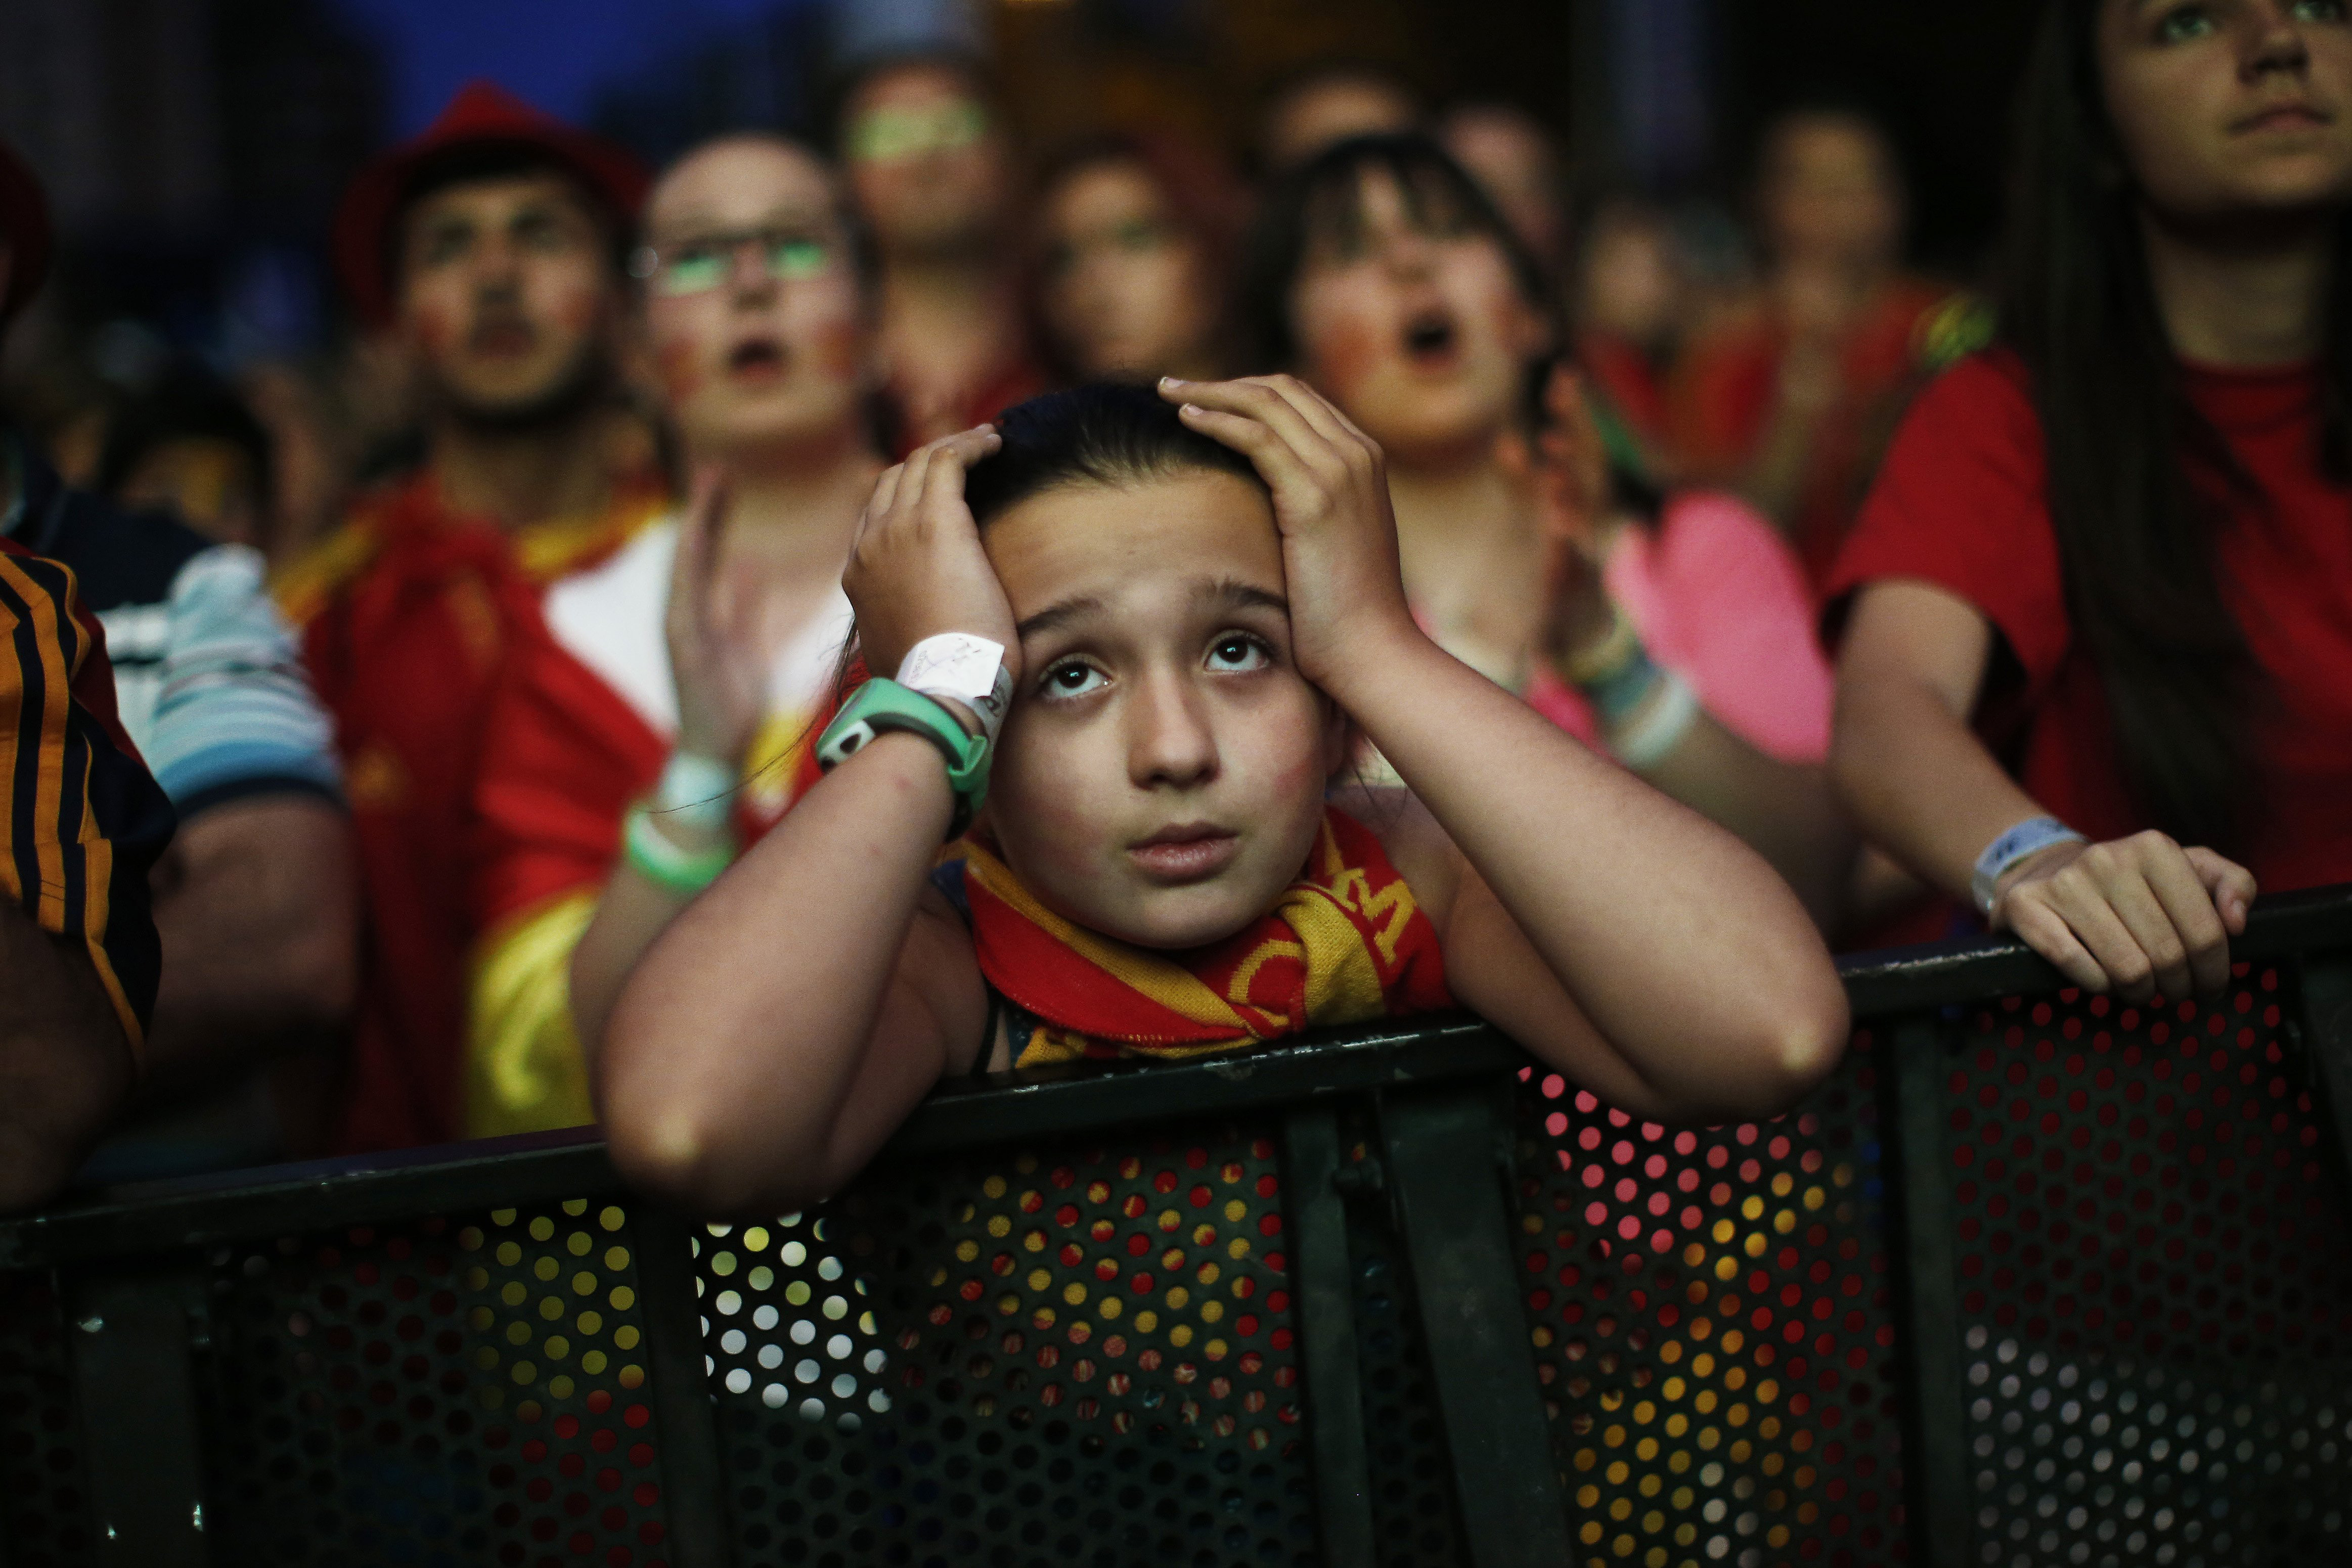 A Spanish fan holds her head as she watches, on a giant display, the match between Spain and Chile, in Madrid on June 18, 2014.